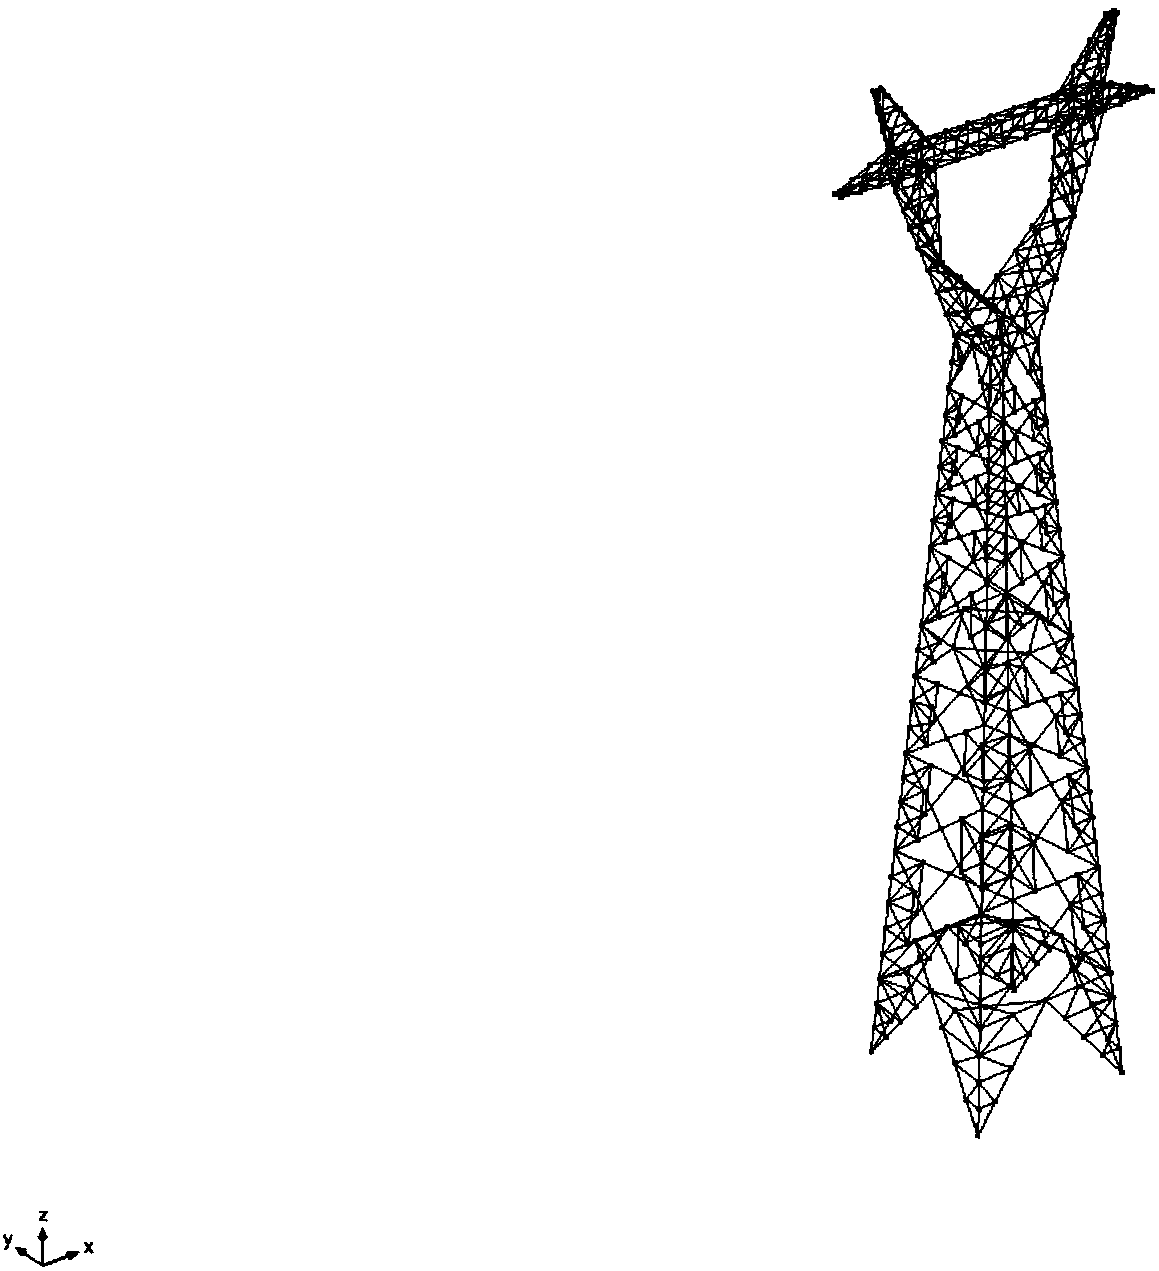 Power transmission tower structural mechanical analysis and App (Application) establishment method